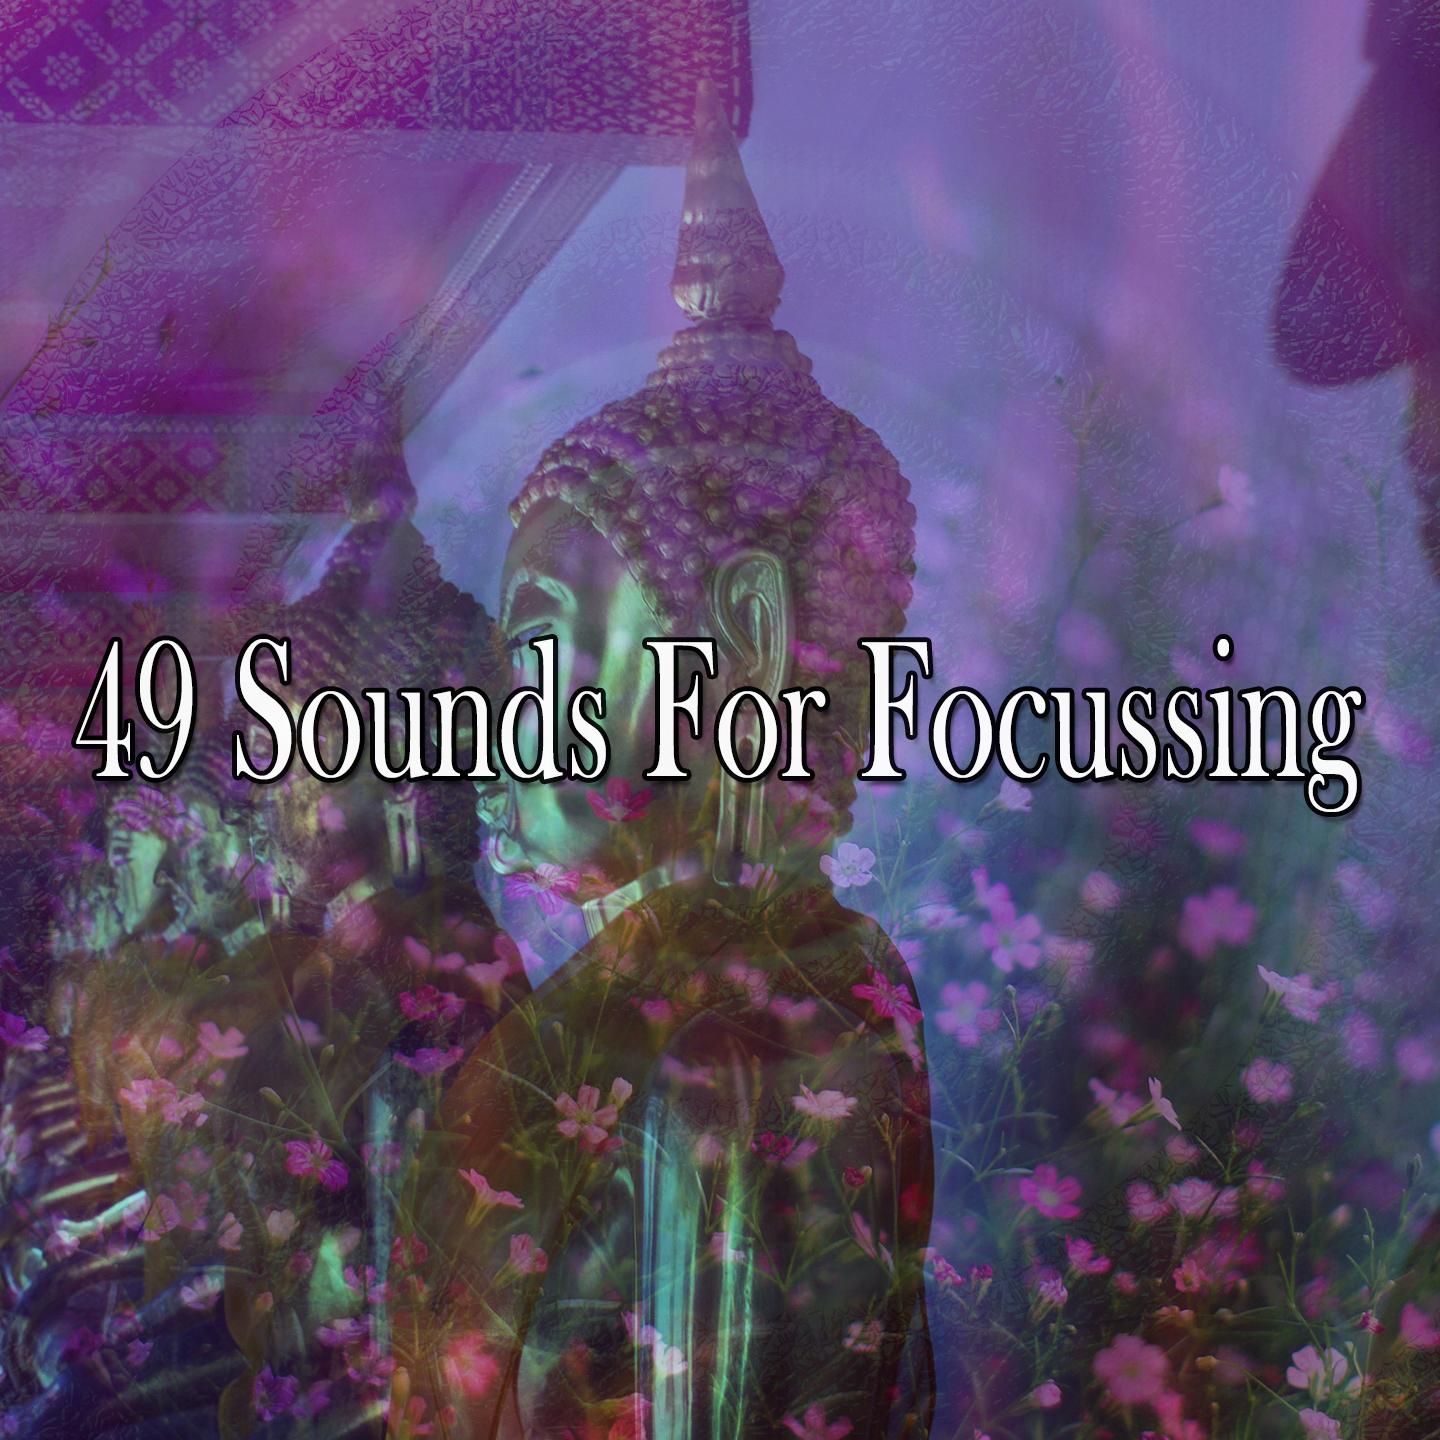 49 Sounds For Focussing